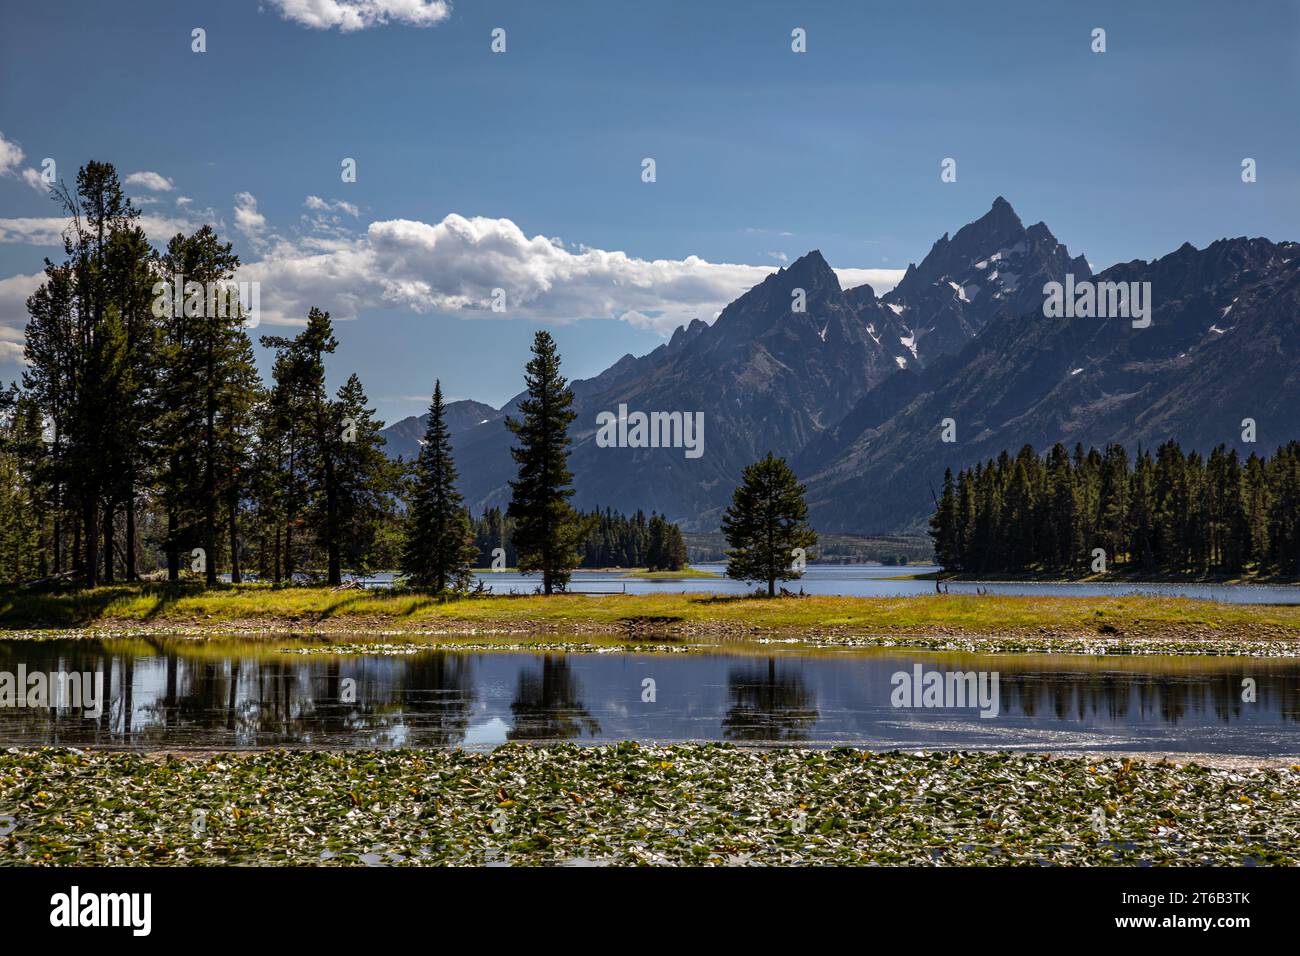 WY05671-00...WYOMING - Lily pads on Heron Pond on Little Mackinaw Bay off Jackson Lake in Grand Teton National Park. Stock Photo